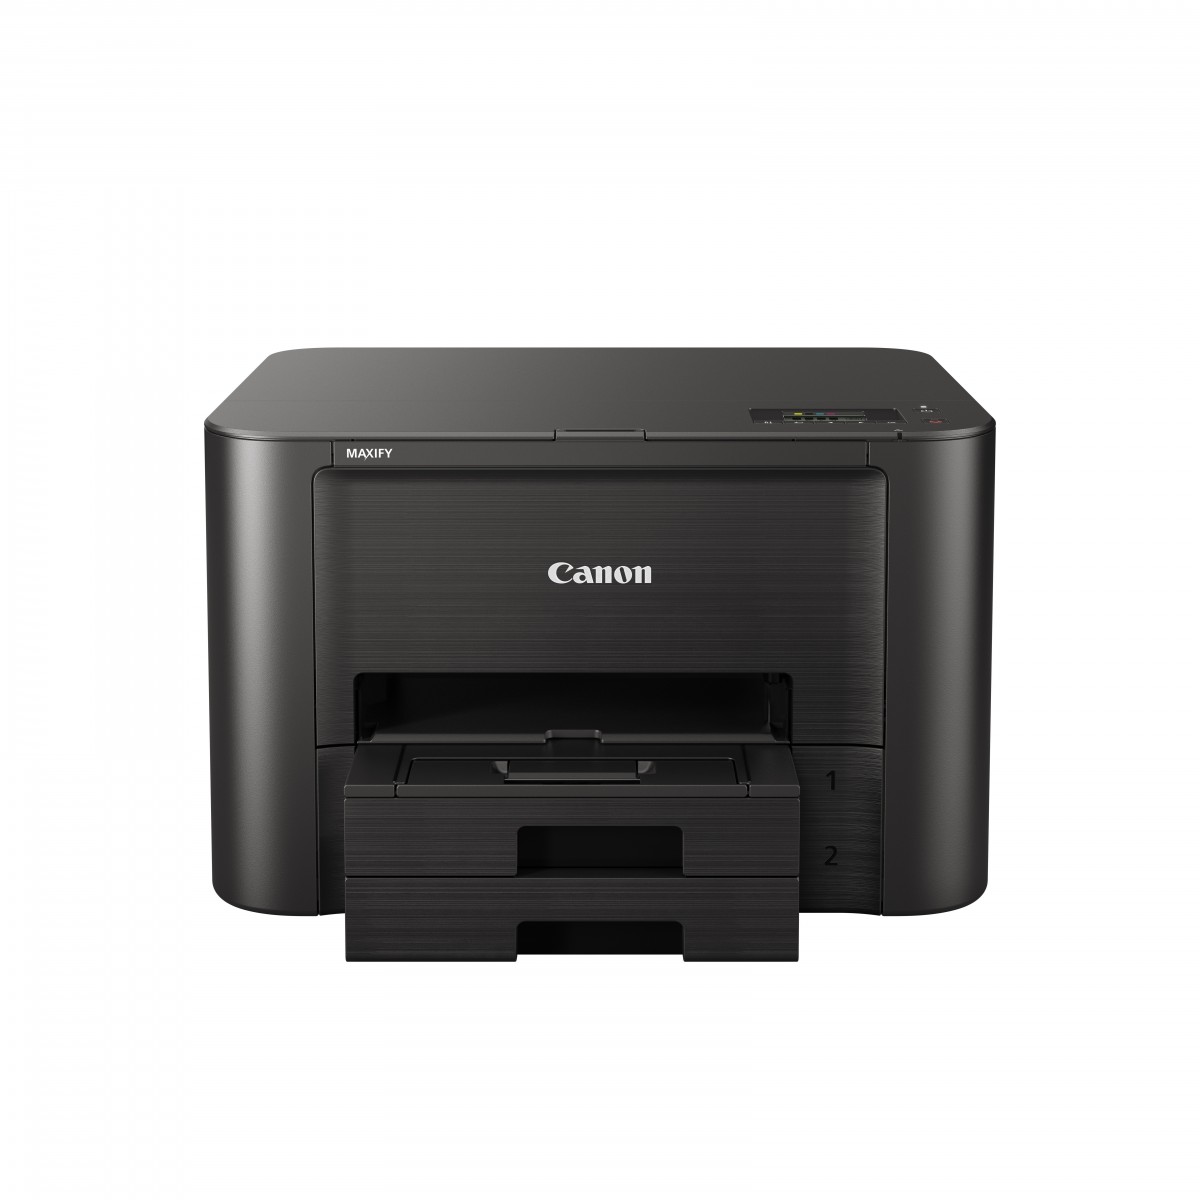 Canon MAXIFY iB4150 - Colour - 600 x 1200 DPI - 4 - A4 - 30000 pages per month - 24 ppm